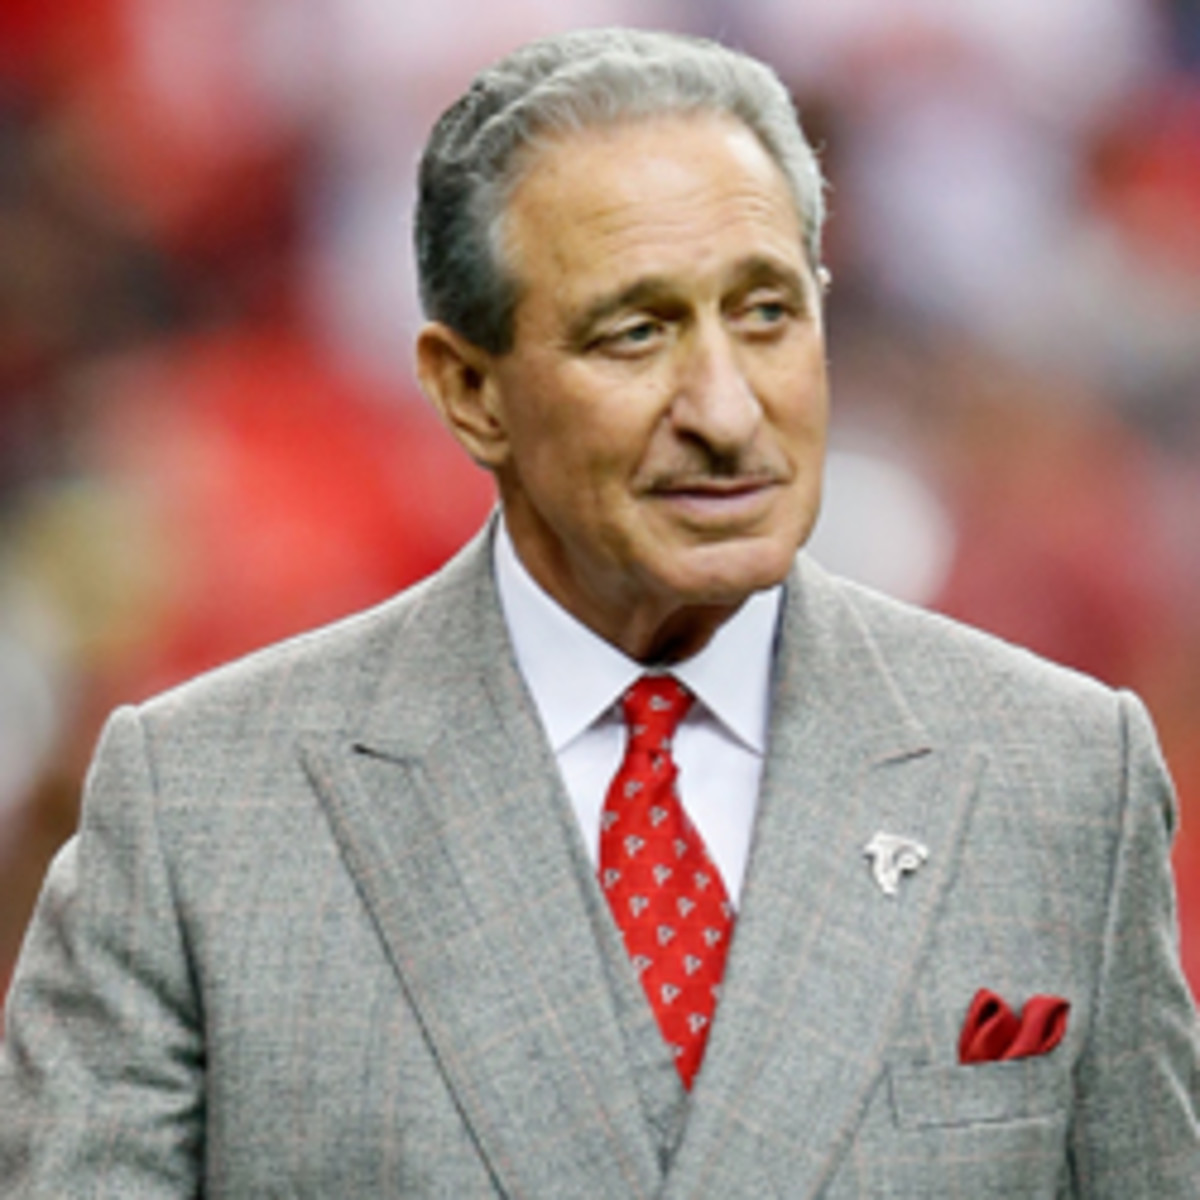 Falcons owner Arthur Blank has experienced resistance for new stadium funding from some Georgia politicians. (Kevin C. Cox/Getty Images)